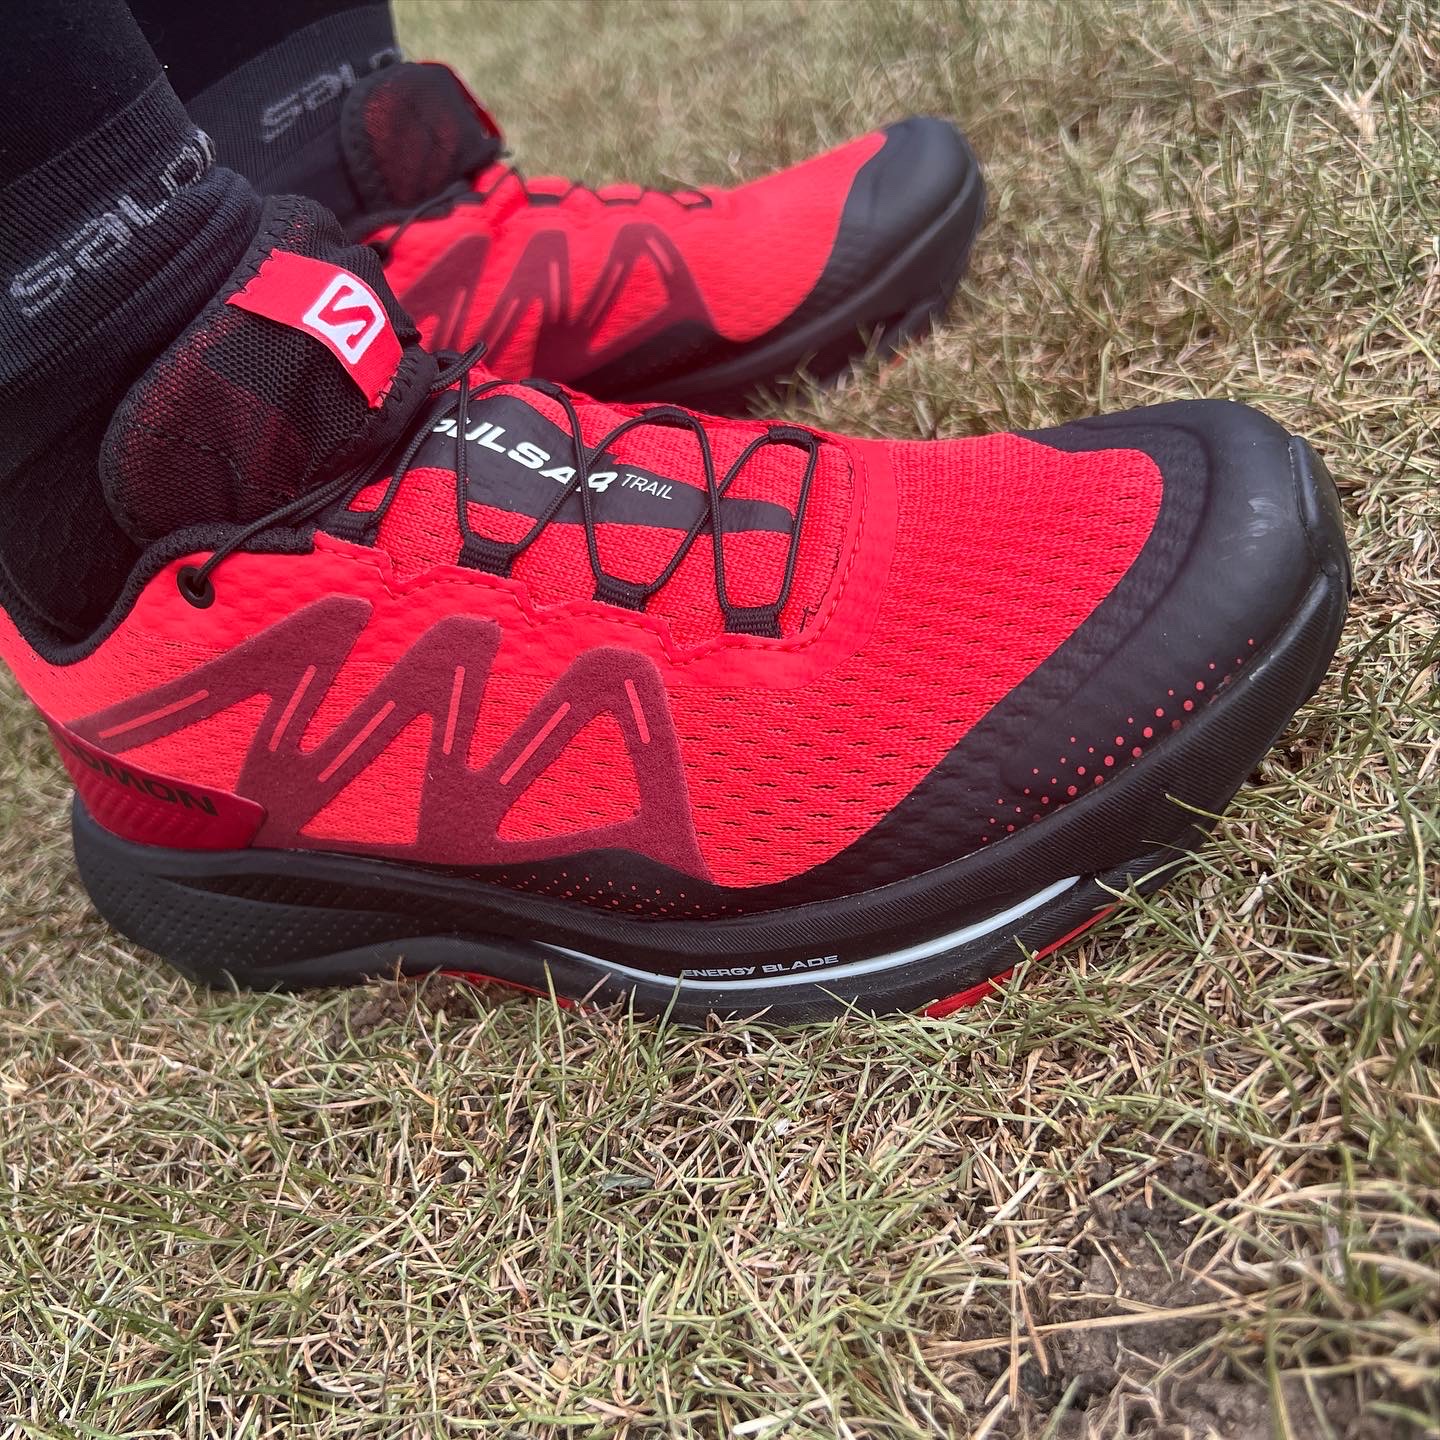 potlood Zuigeling Misverstand Road Trail Run: Salomon Pulsar Trail Review: The New Salomon! Plated,  Protective, Deeply Cushioned, Fun and Versatile.